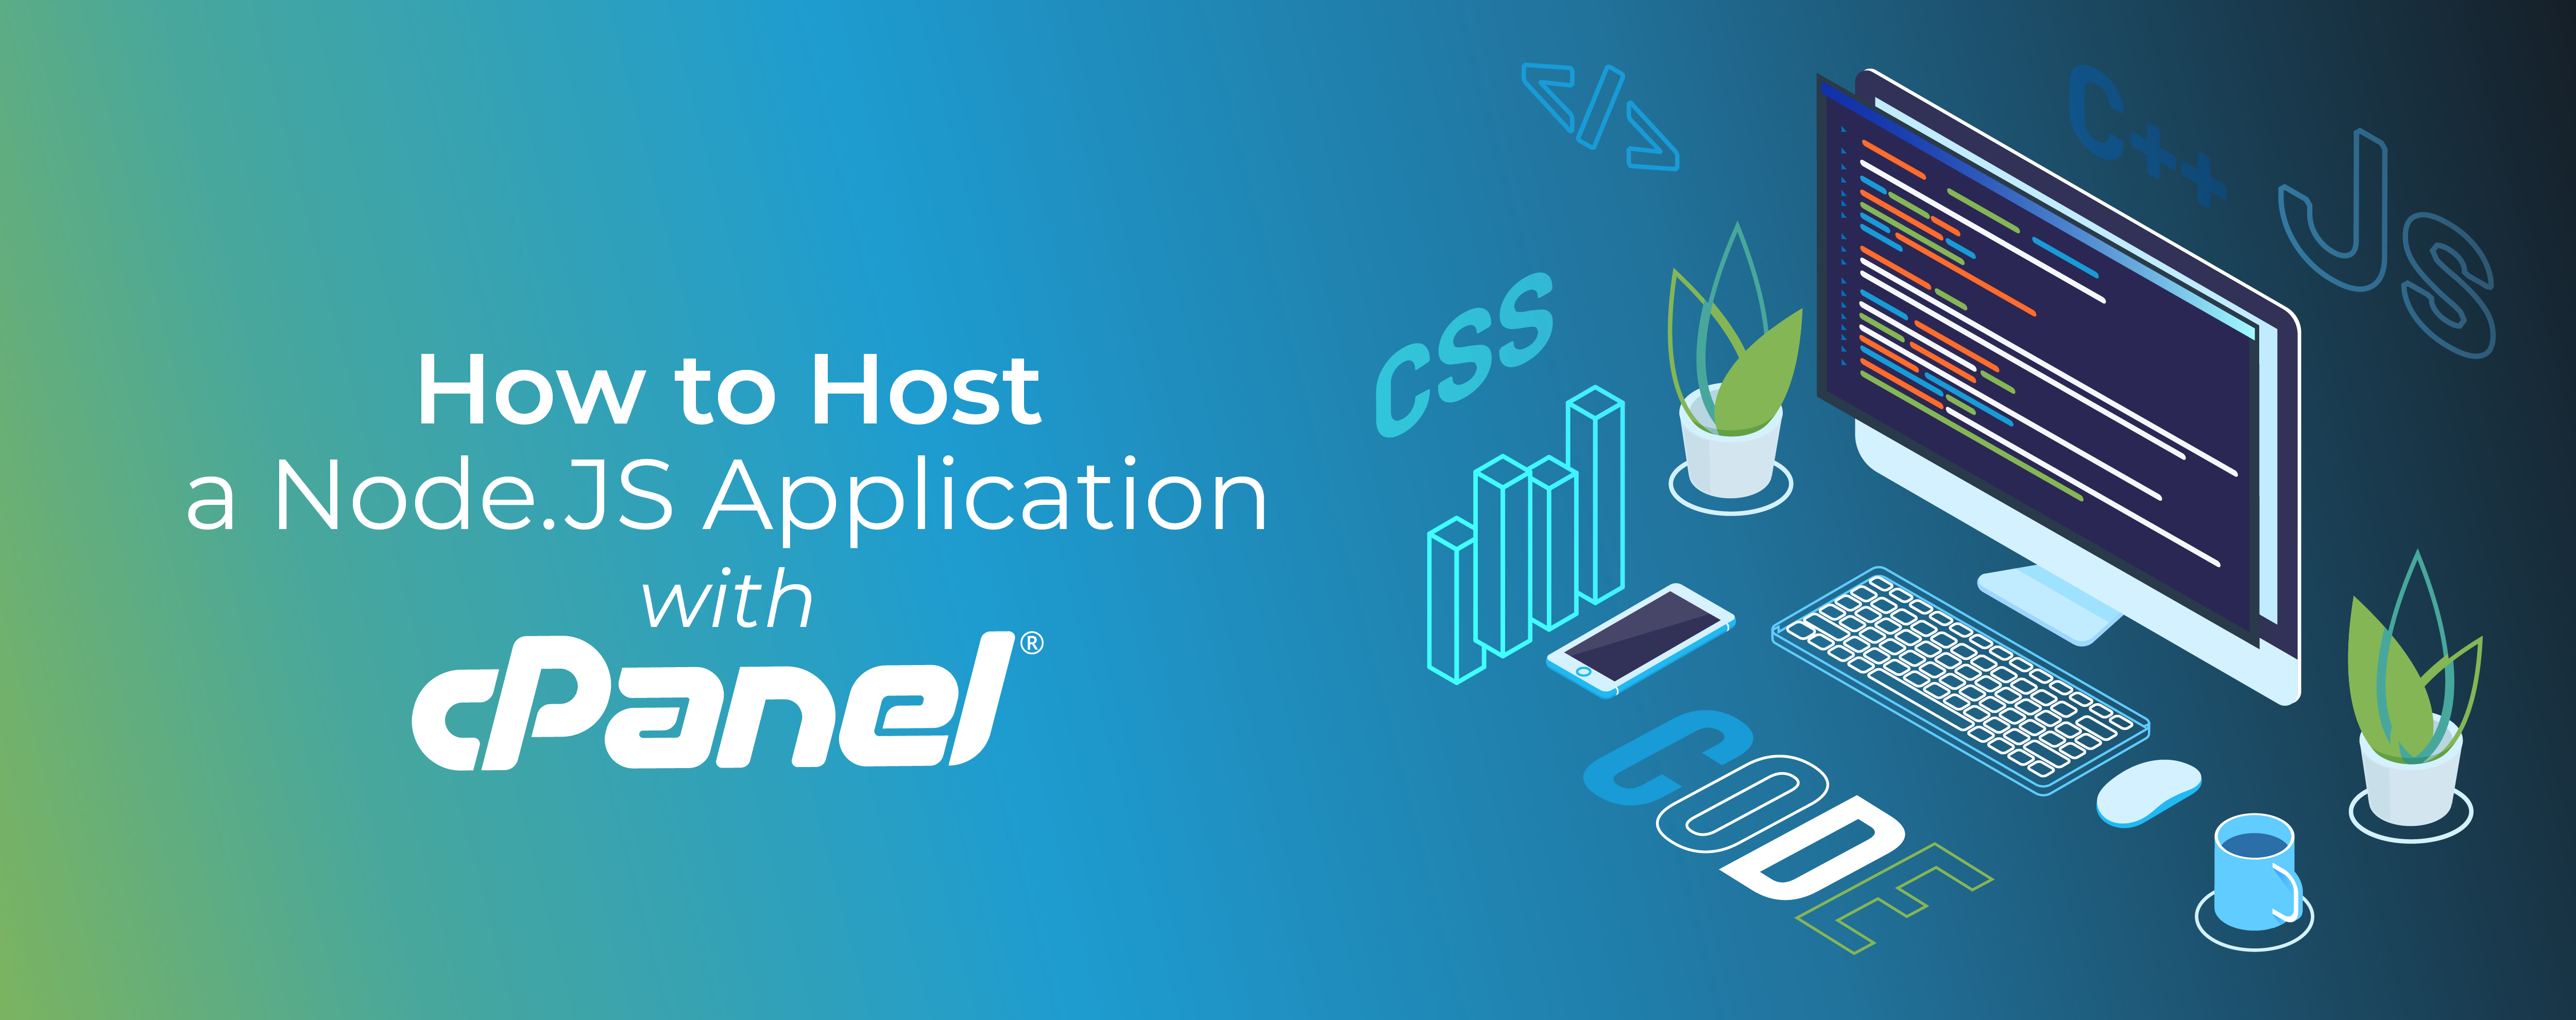 How to Host a Node.JS Application With cPanel